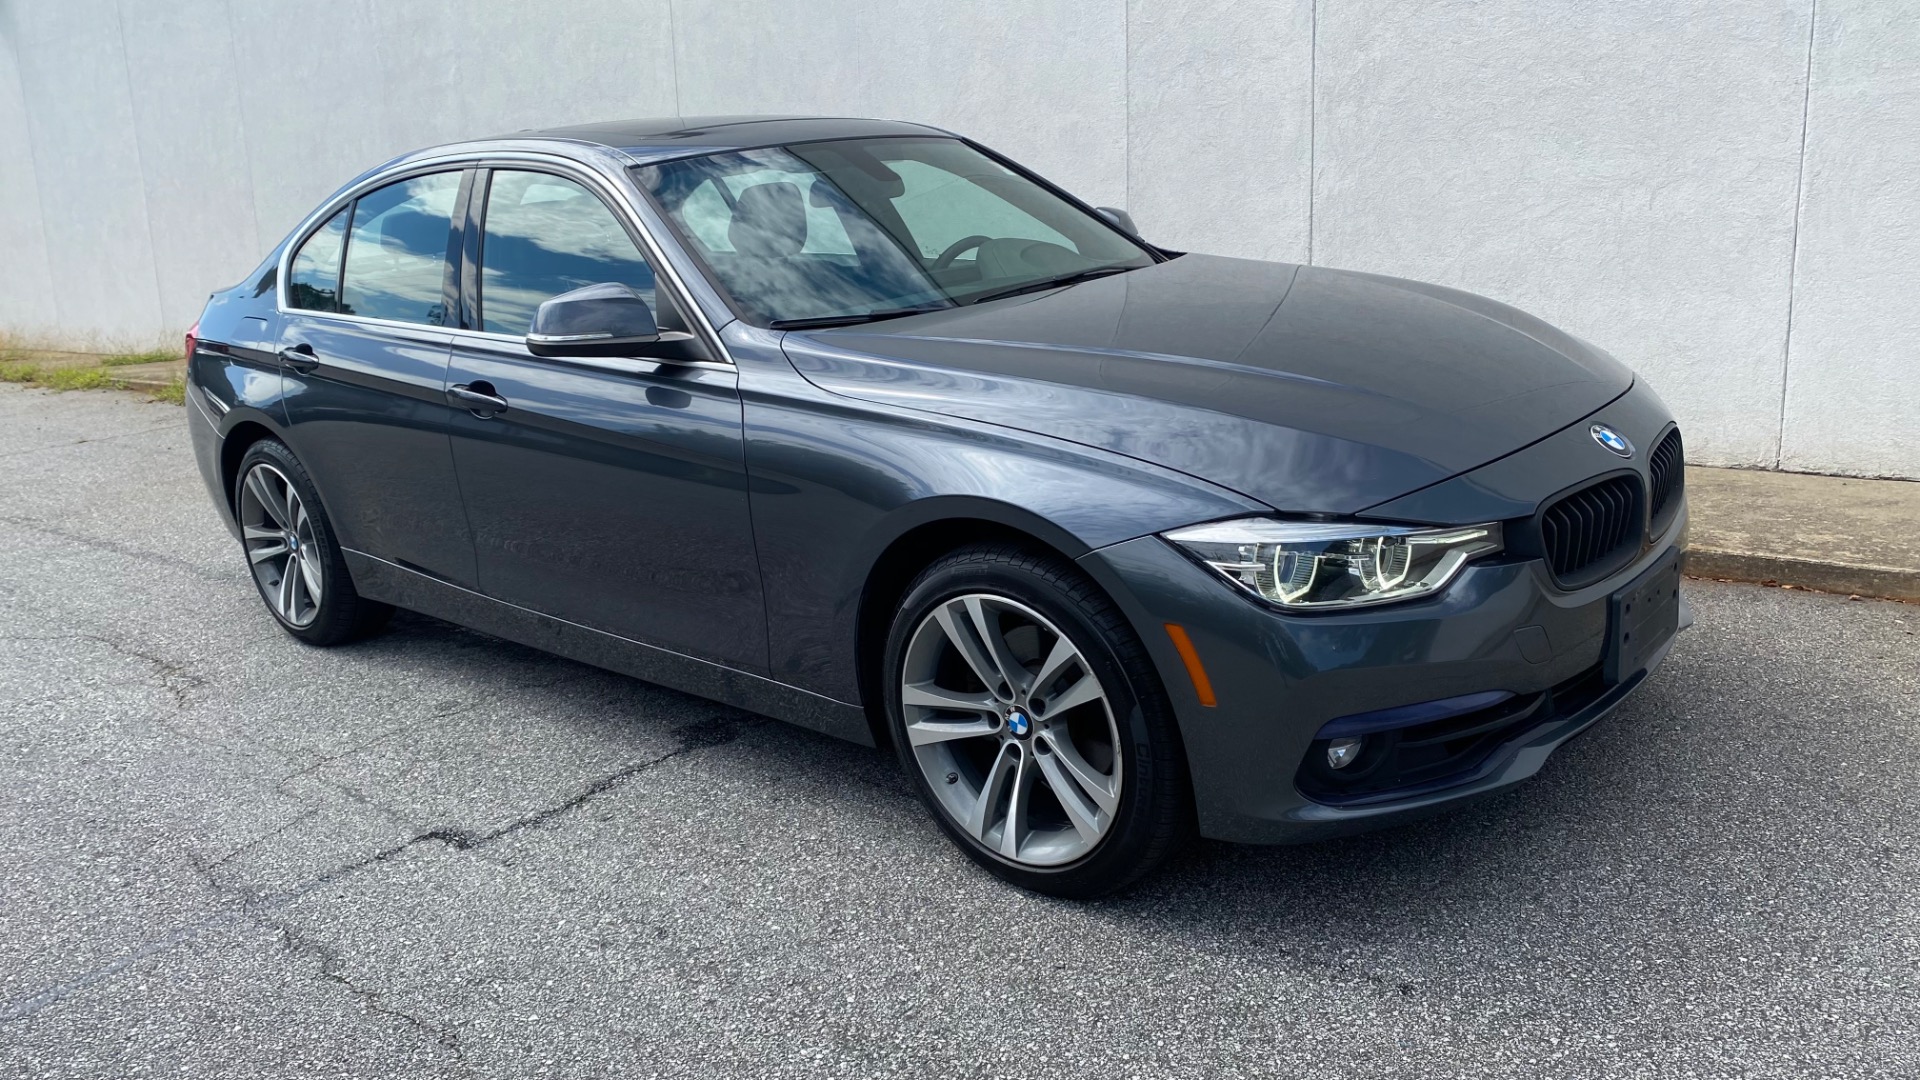 Used 2018 BMW 3 SERIES 330I XDRIVE / CONV PKG / SUNROOF / SPORT STS / HTD STS / REARVIE for sale Sold at Formula Imports in Charlotte NC 28227 11